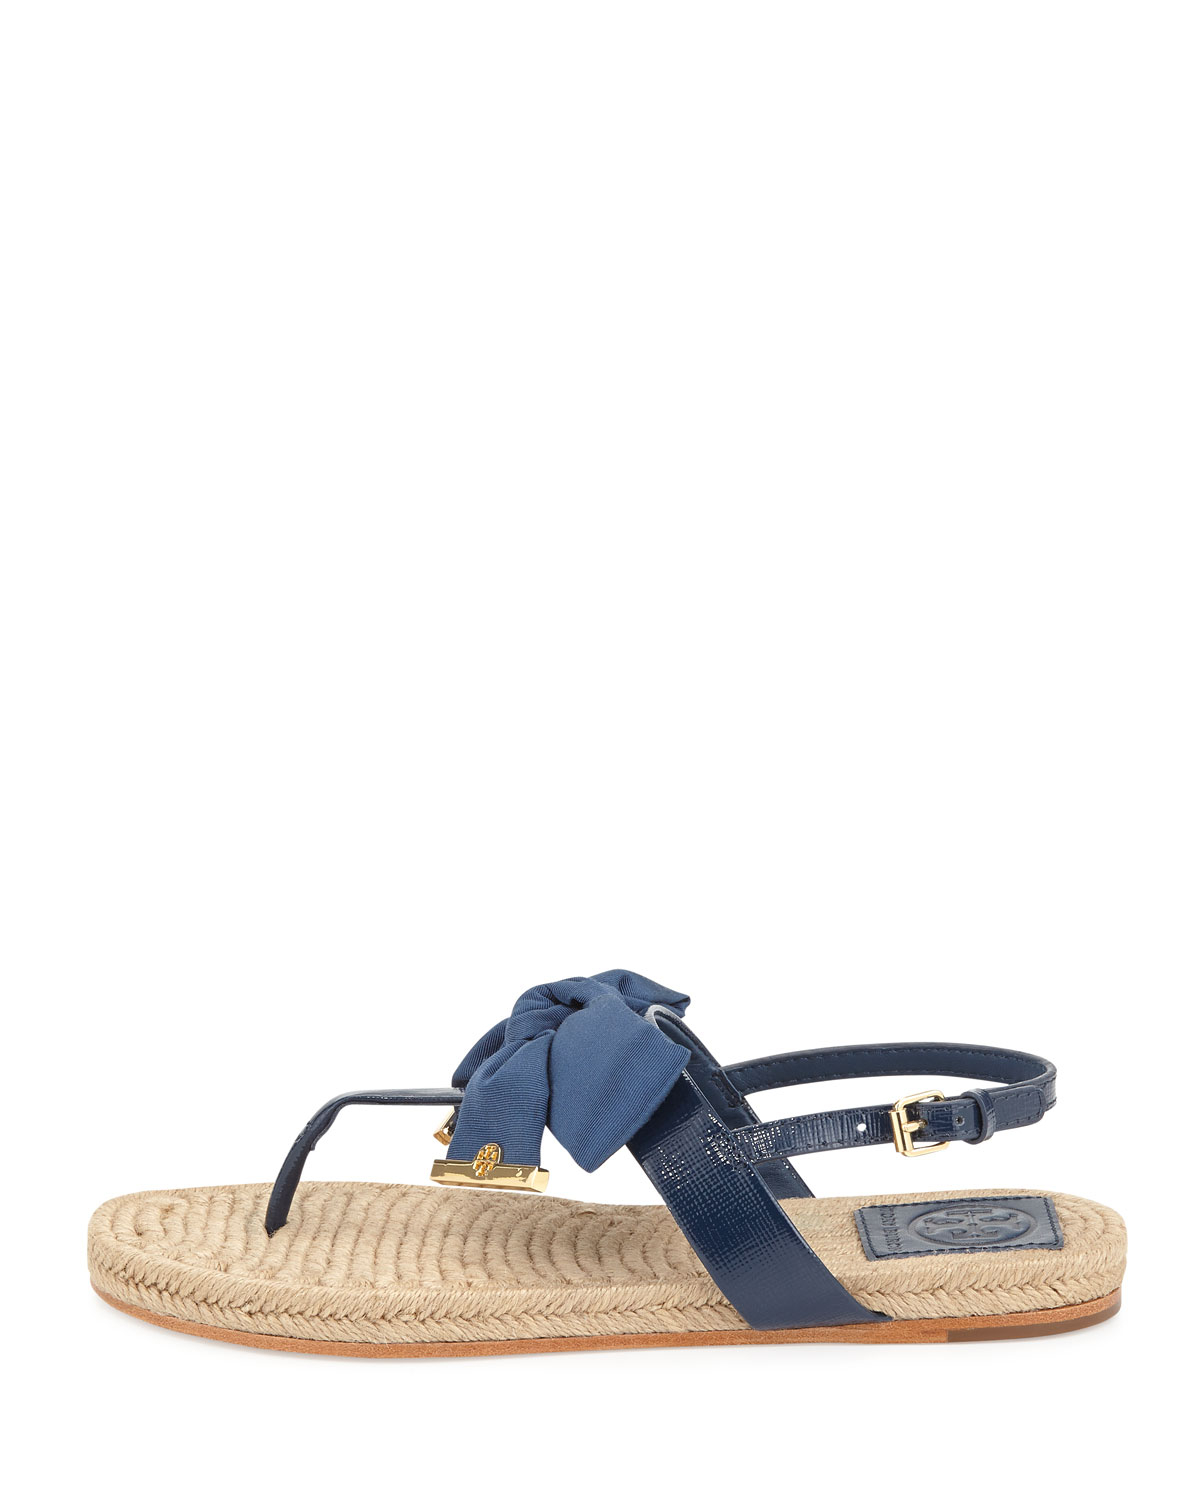 Lyst - Tory Burch Penny Flat Bow Espadrille Thong Sandals Newport Navy